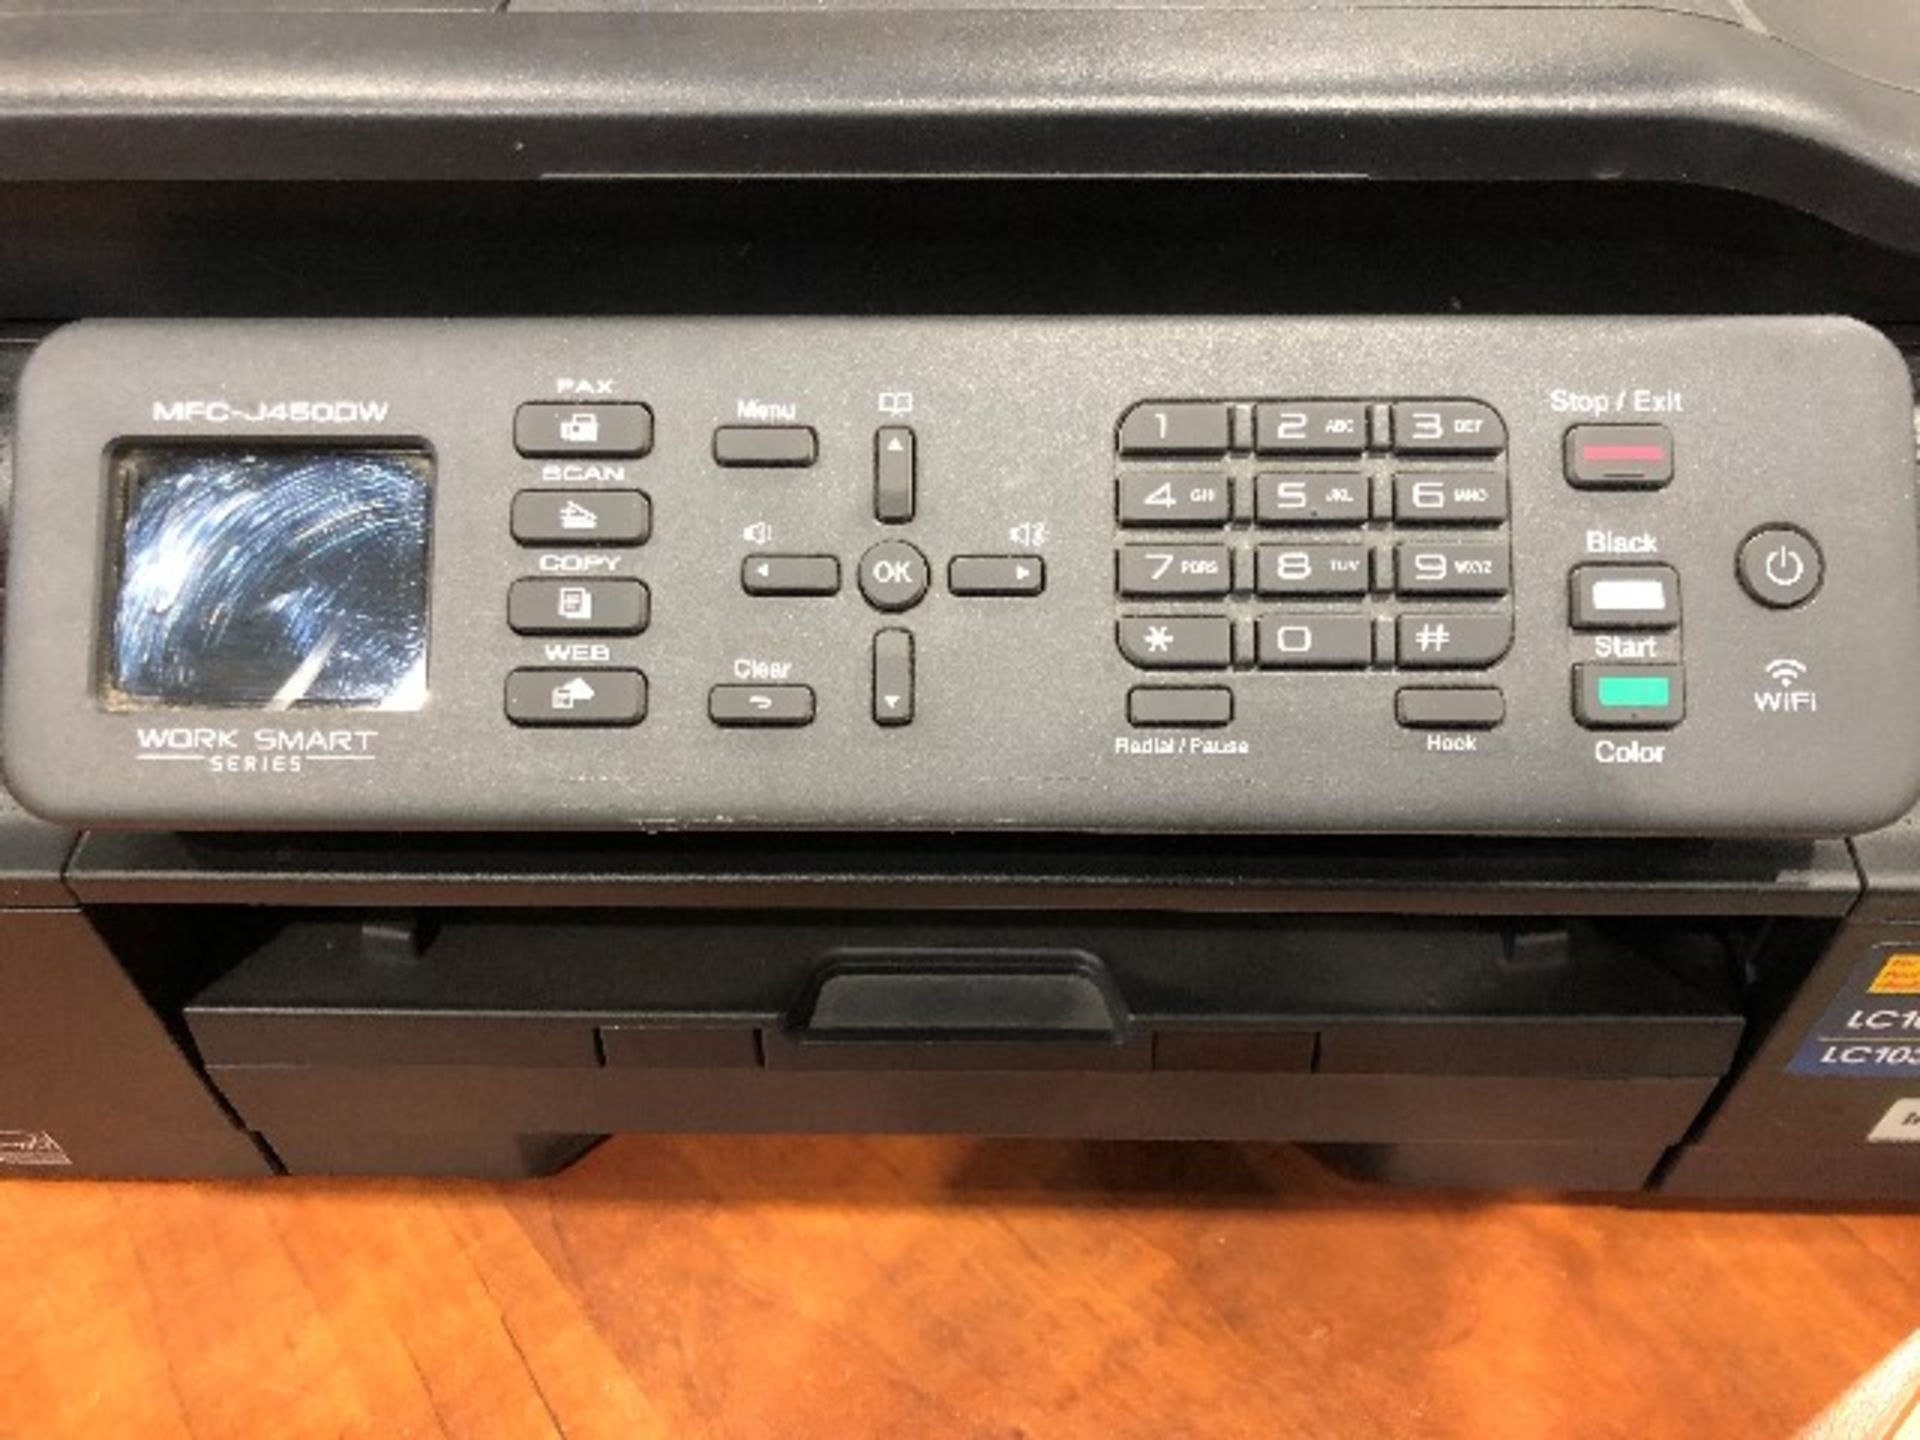 Brother MFC-J4500W multi function printer - Image 3 of 3